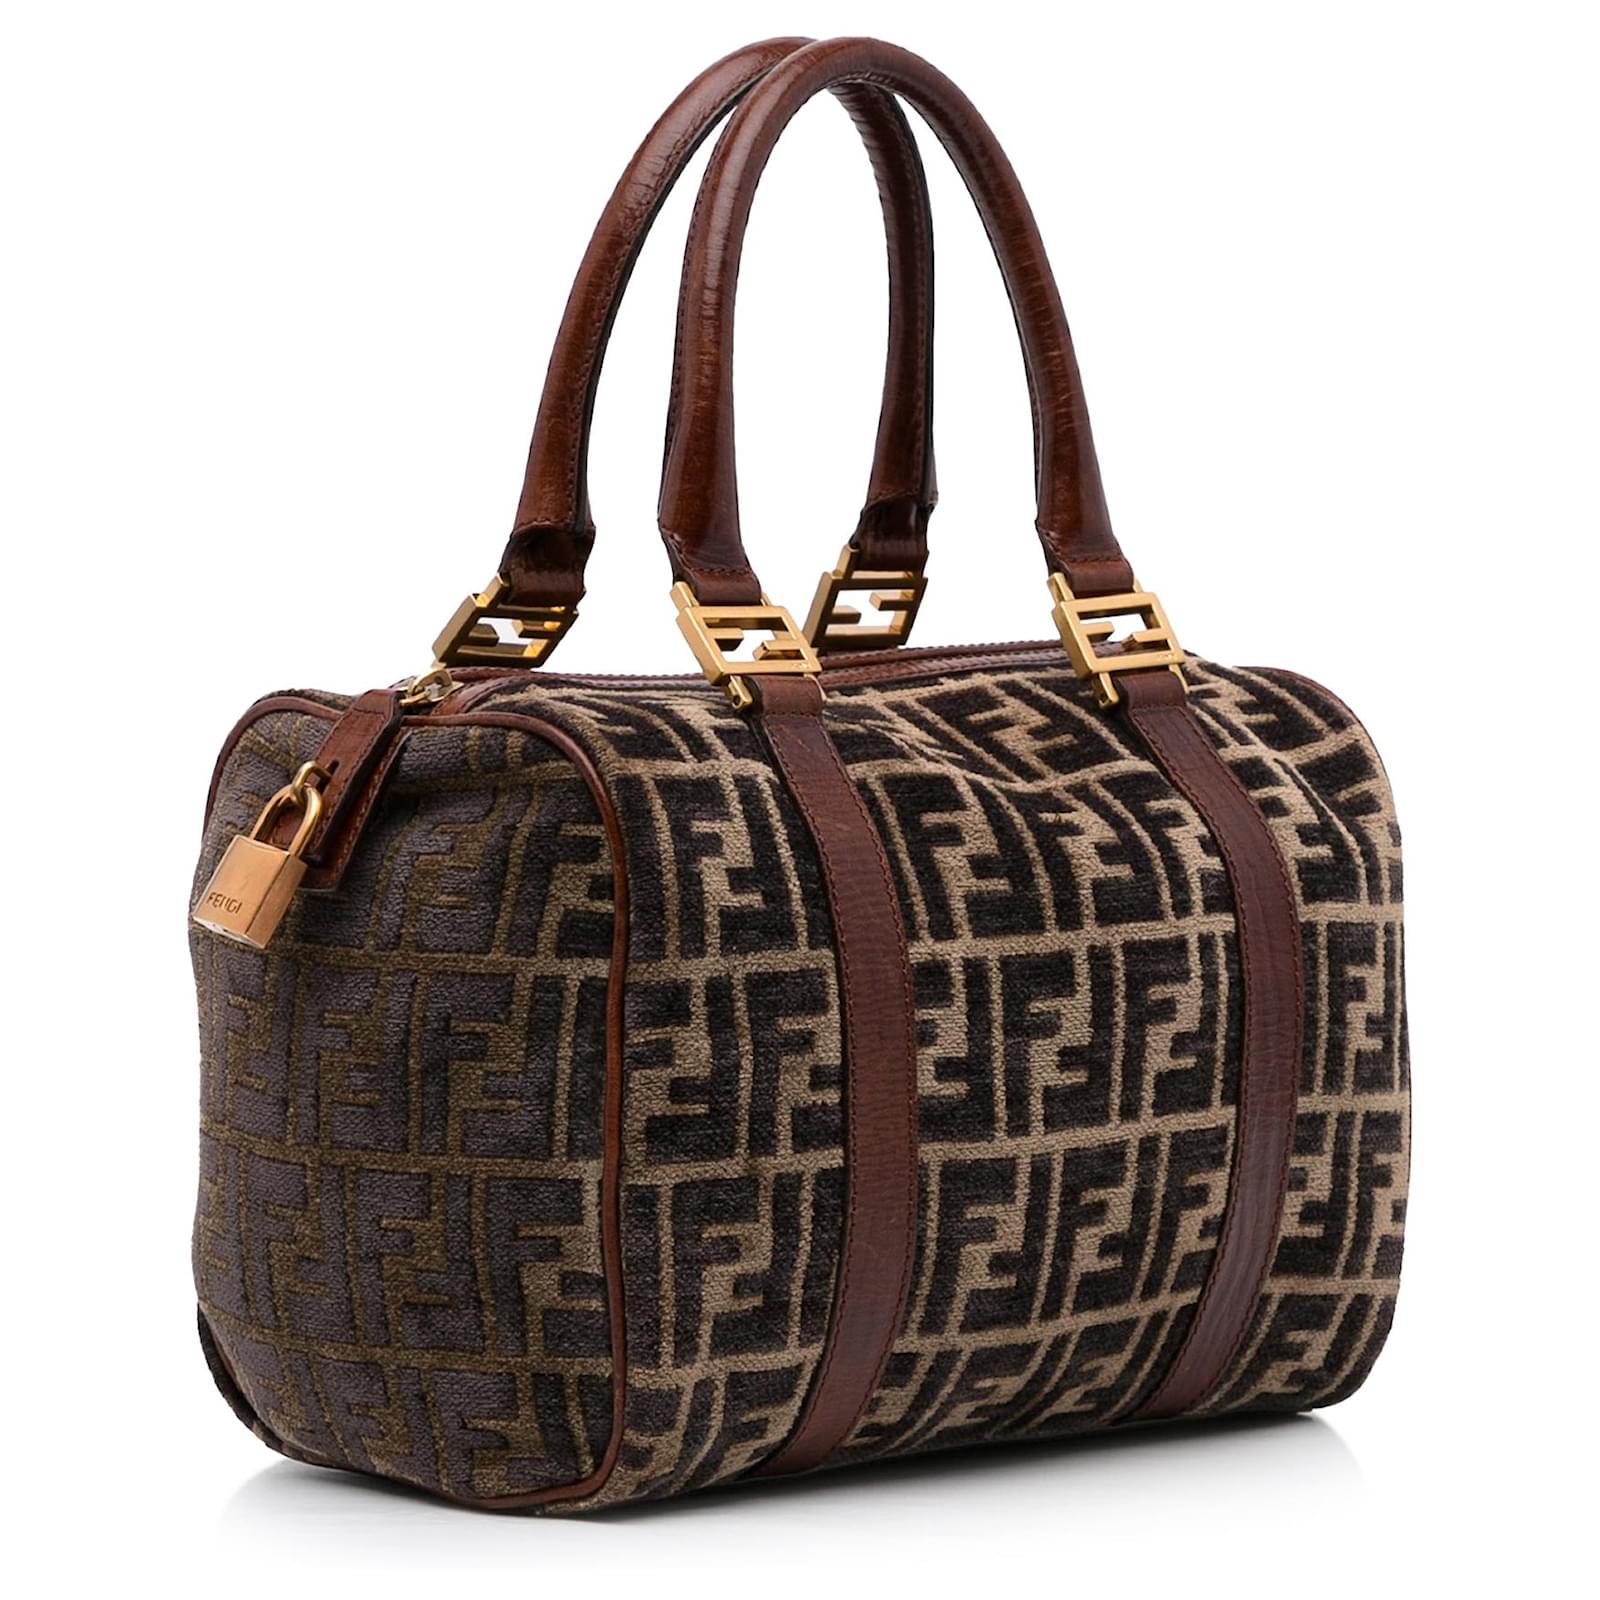 Fendi Leather-Trimmed Zucca Boston Bag - Brown Handle Bags